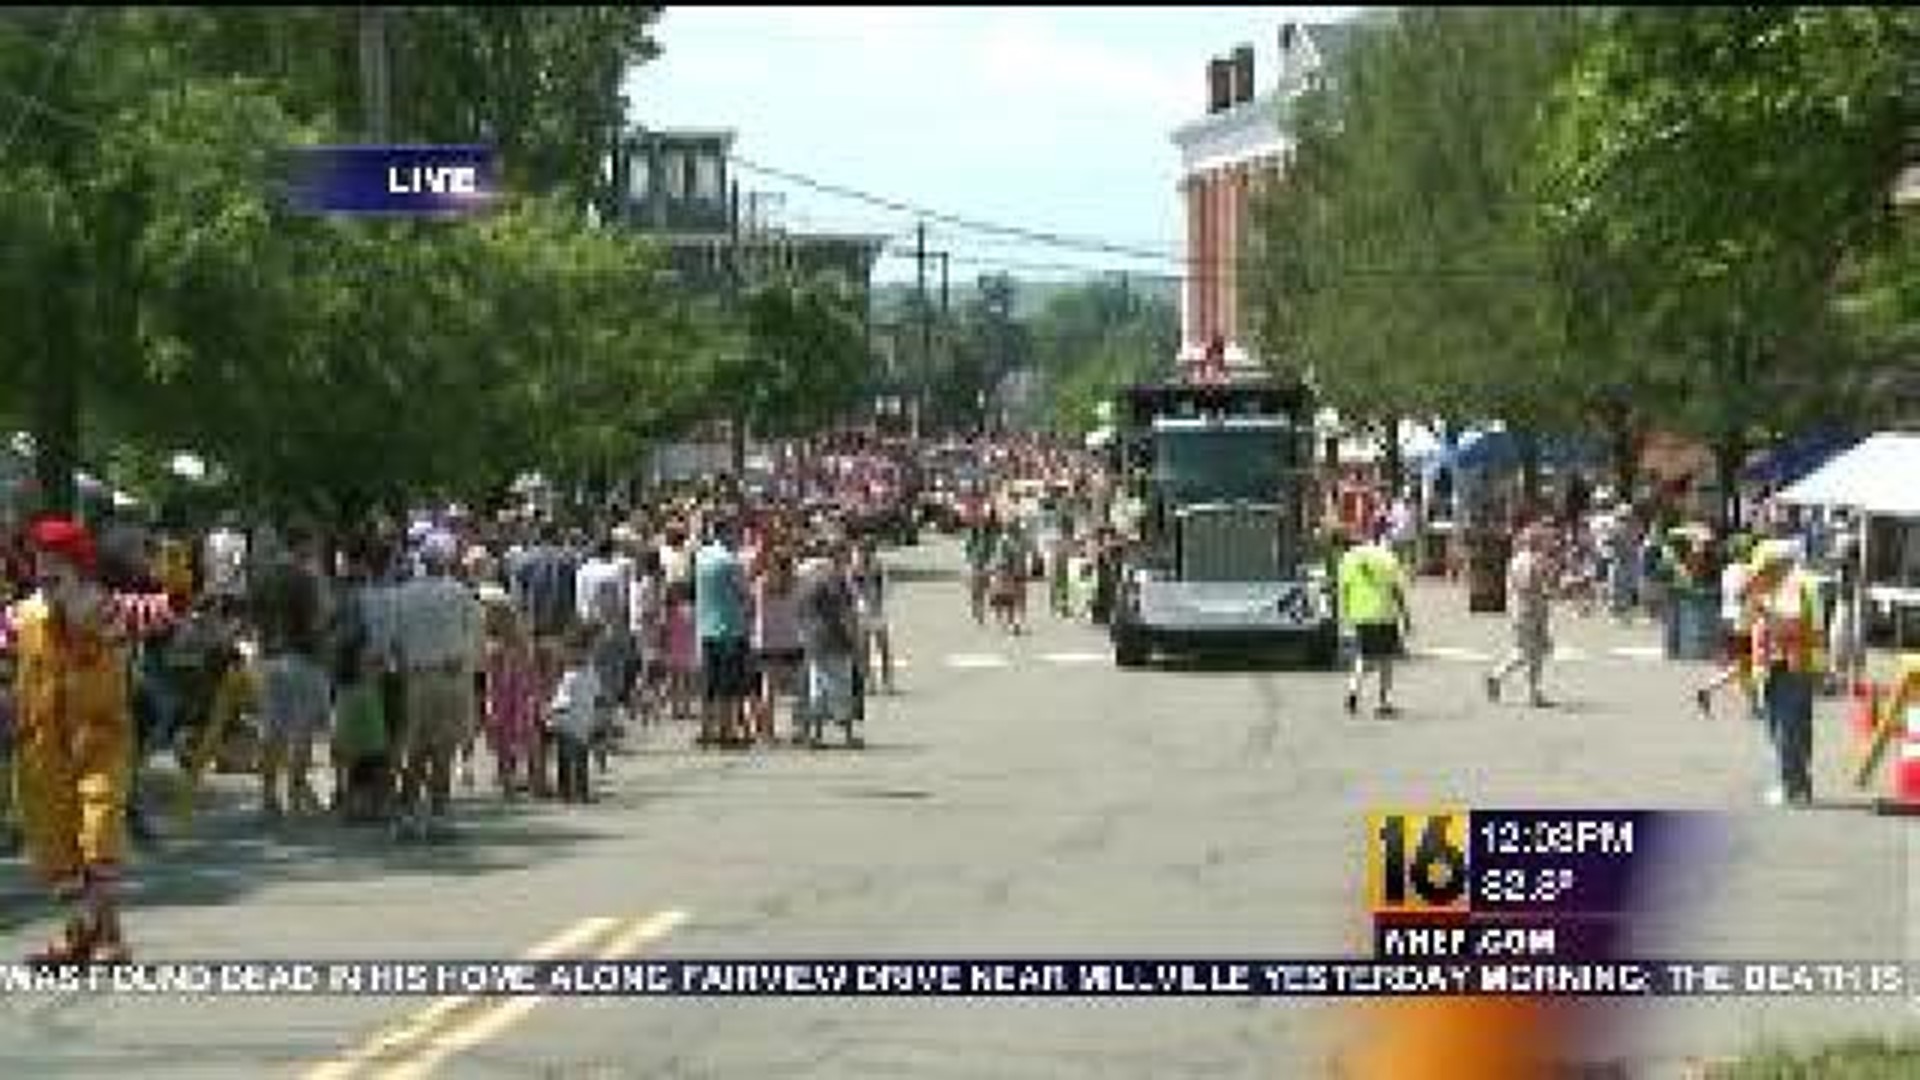 Festivities For The Fourth In Susquehanna County